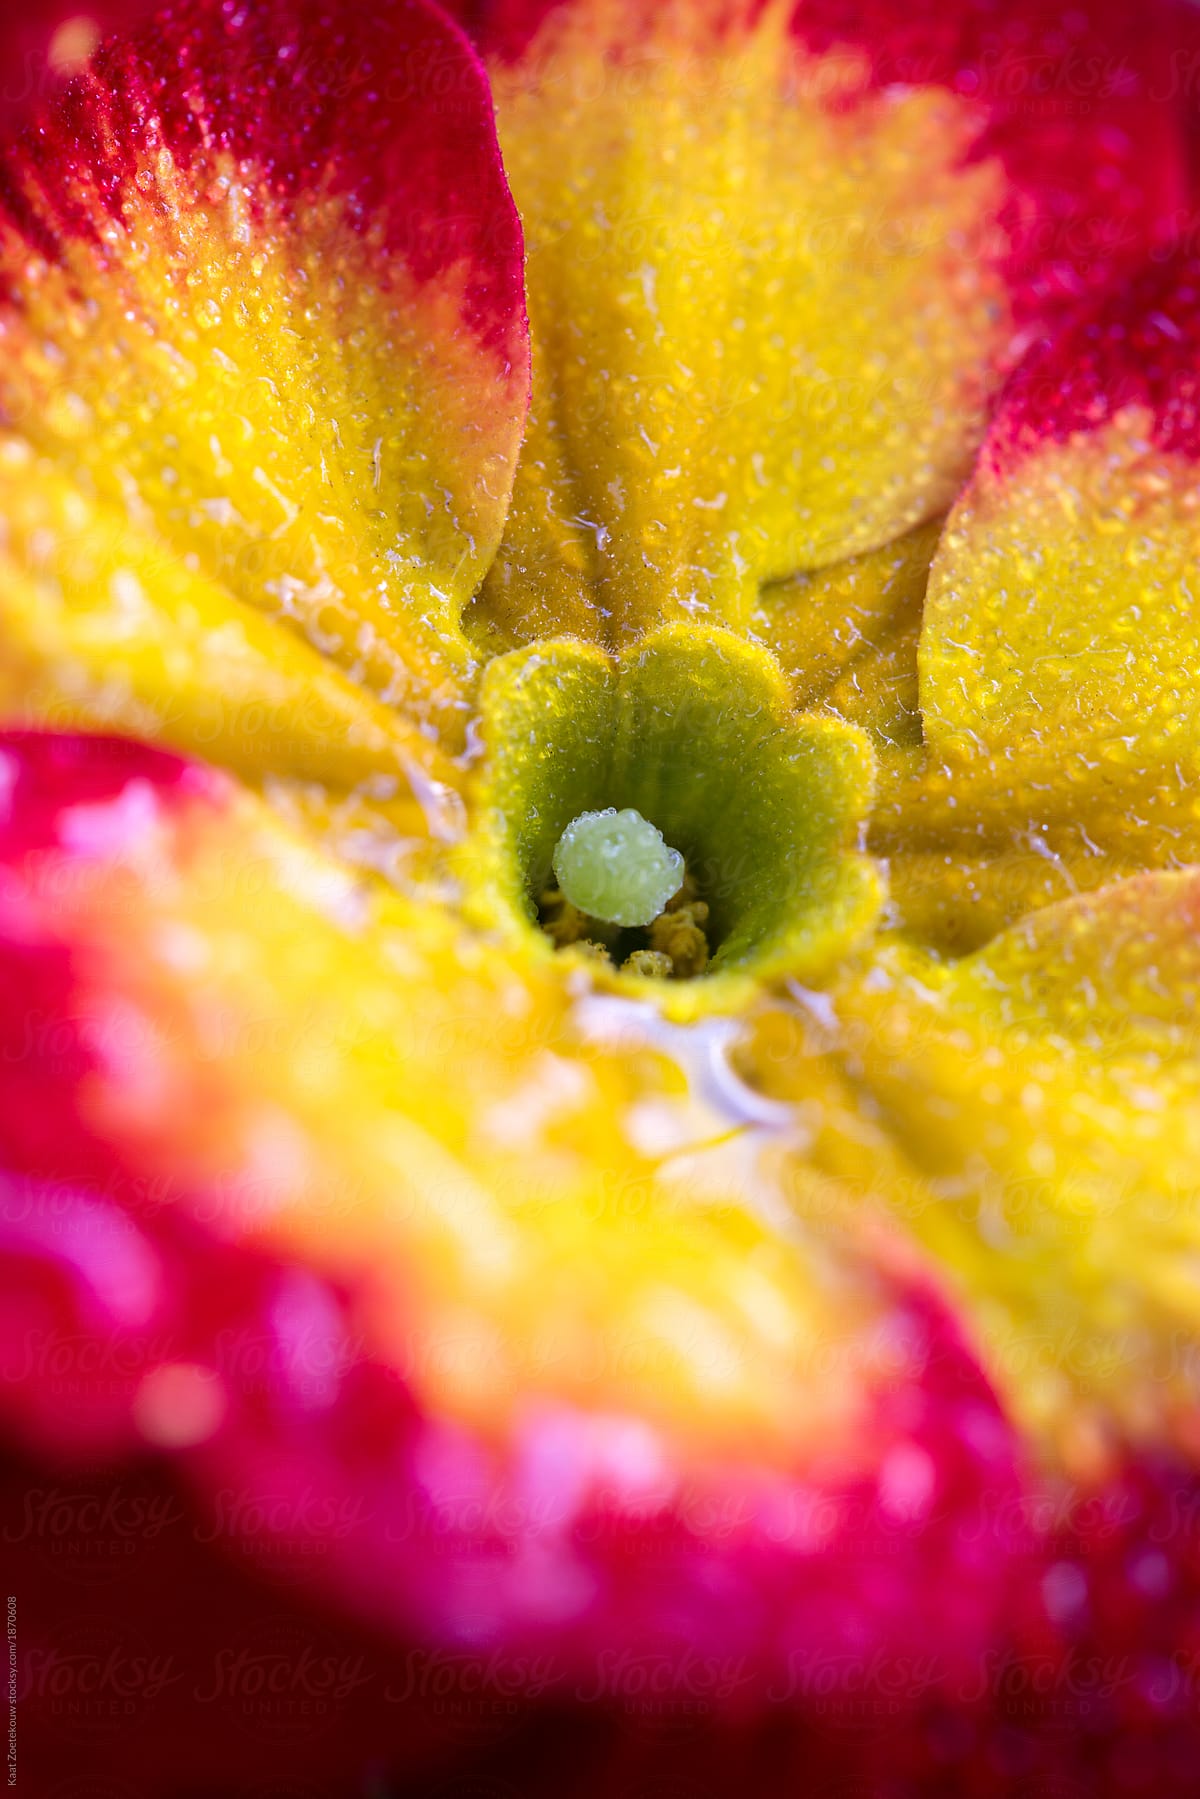 Close-up of Primula flowers covered in droplets